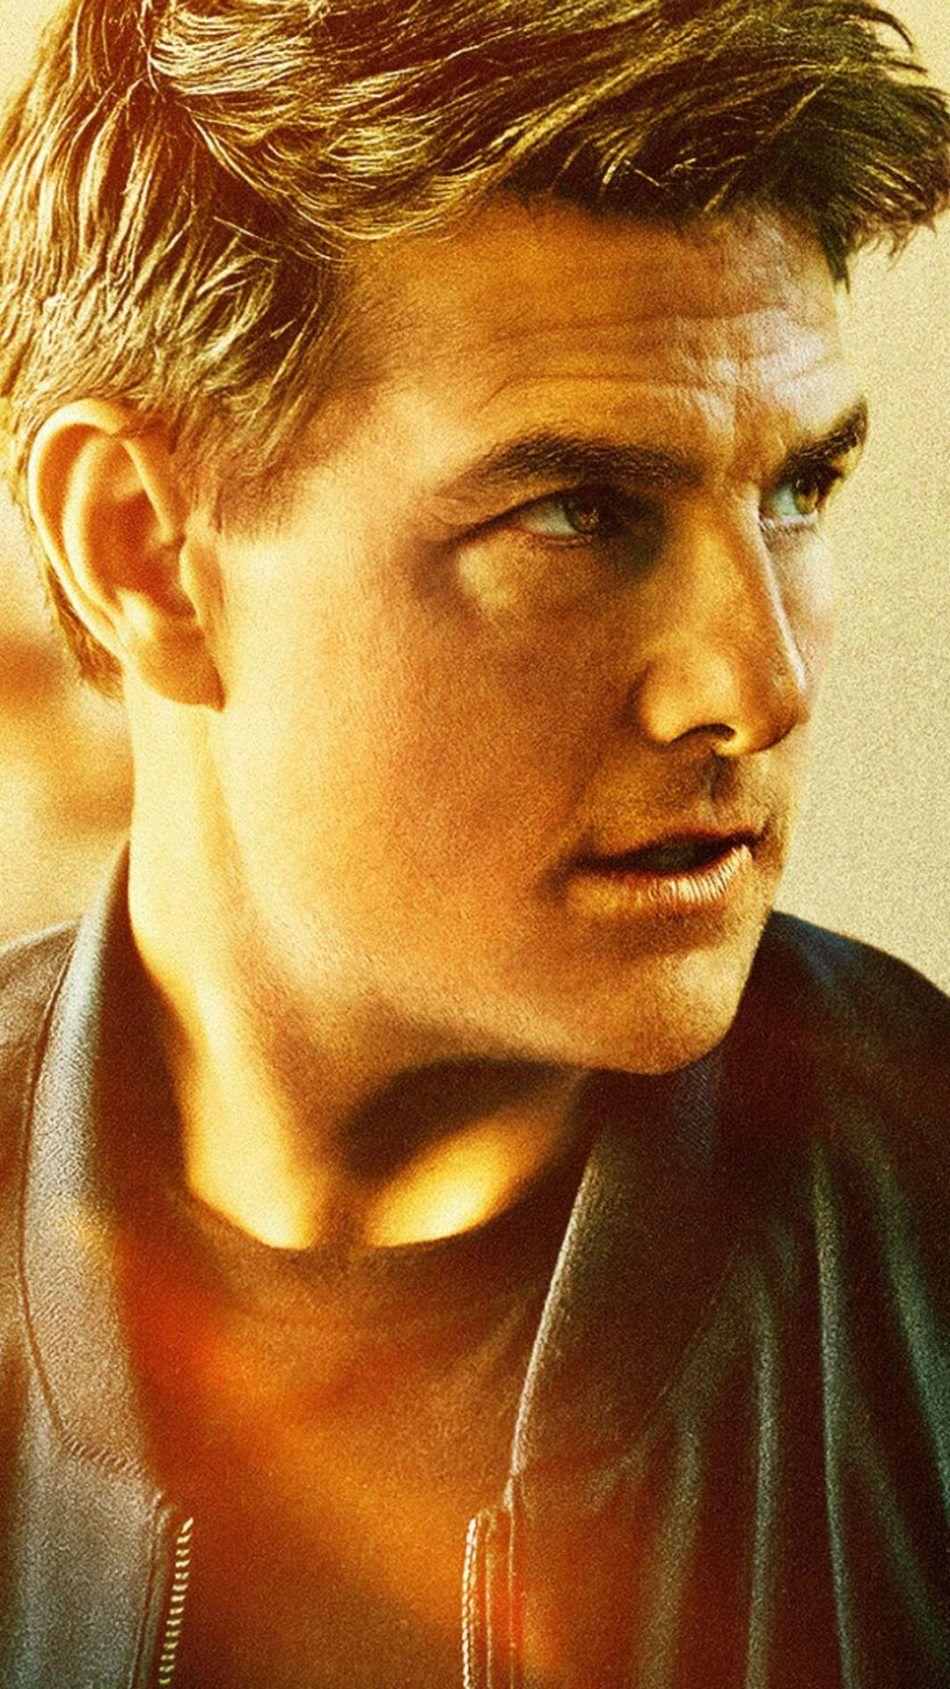 Tom Cruise As Ethan Hunt In Mission Impossible Fallout. Tom